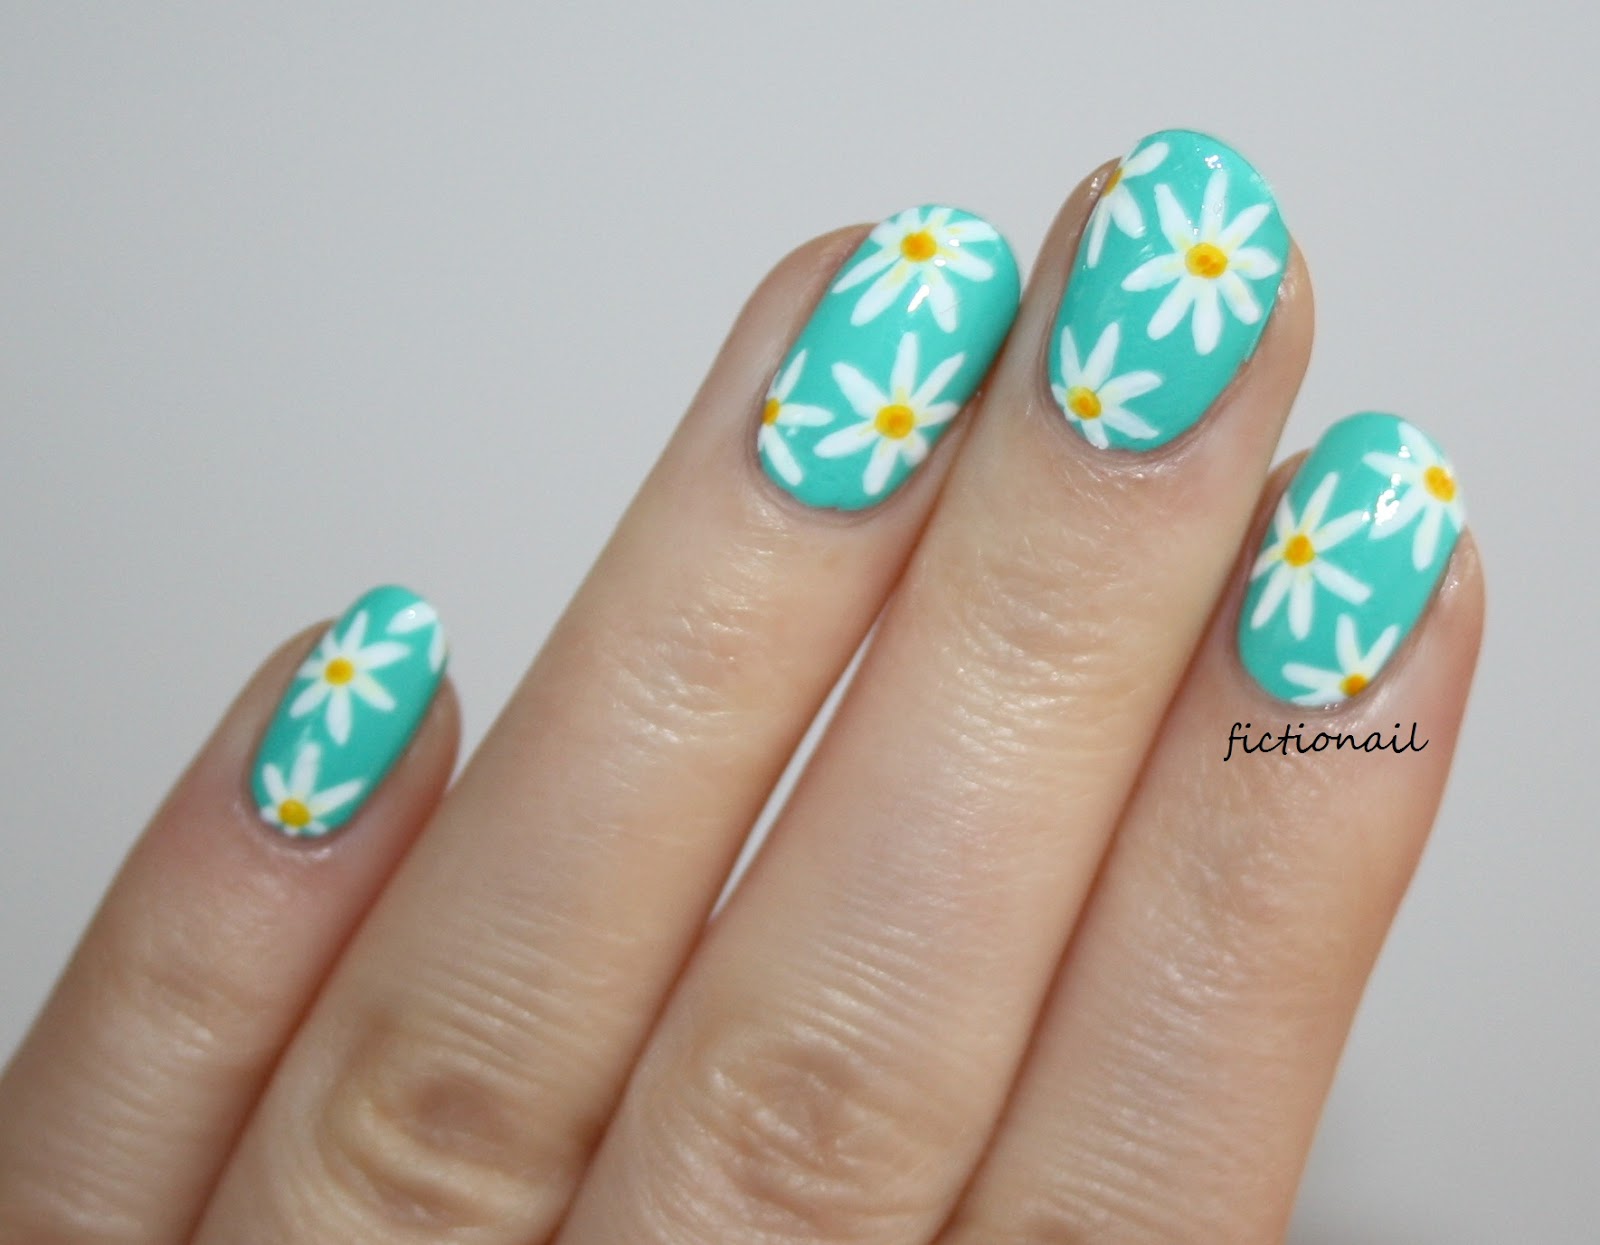 4. Nail Art Inspiration: Daisy and Studs - wide 5